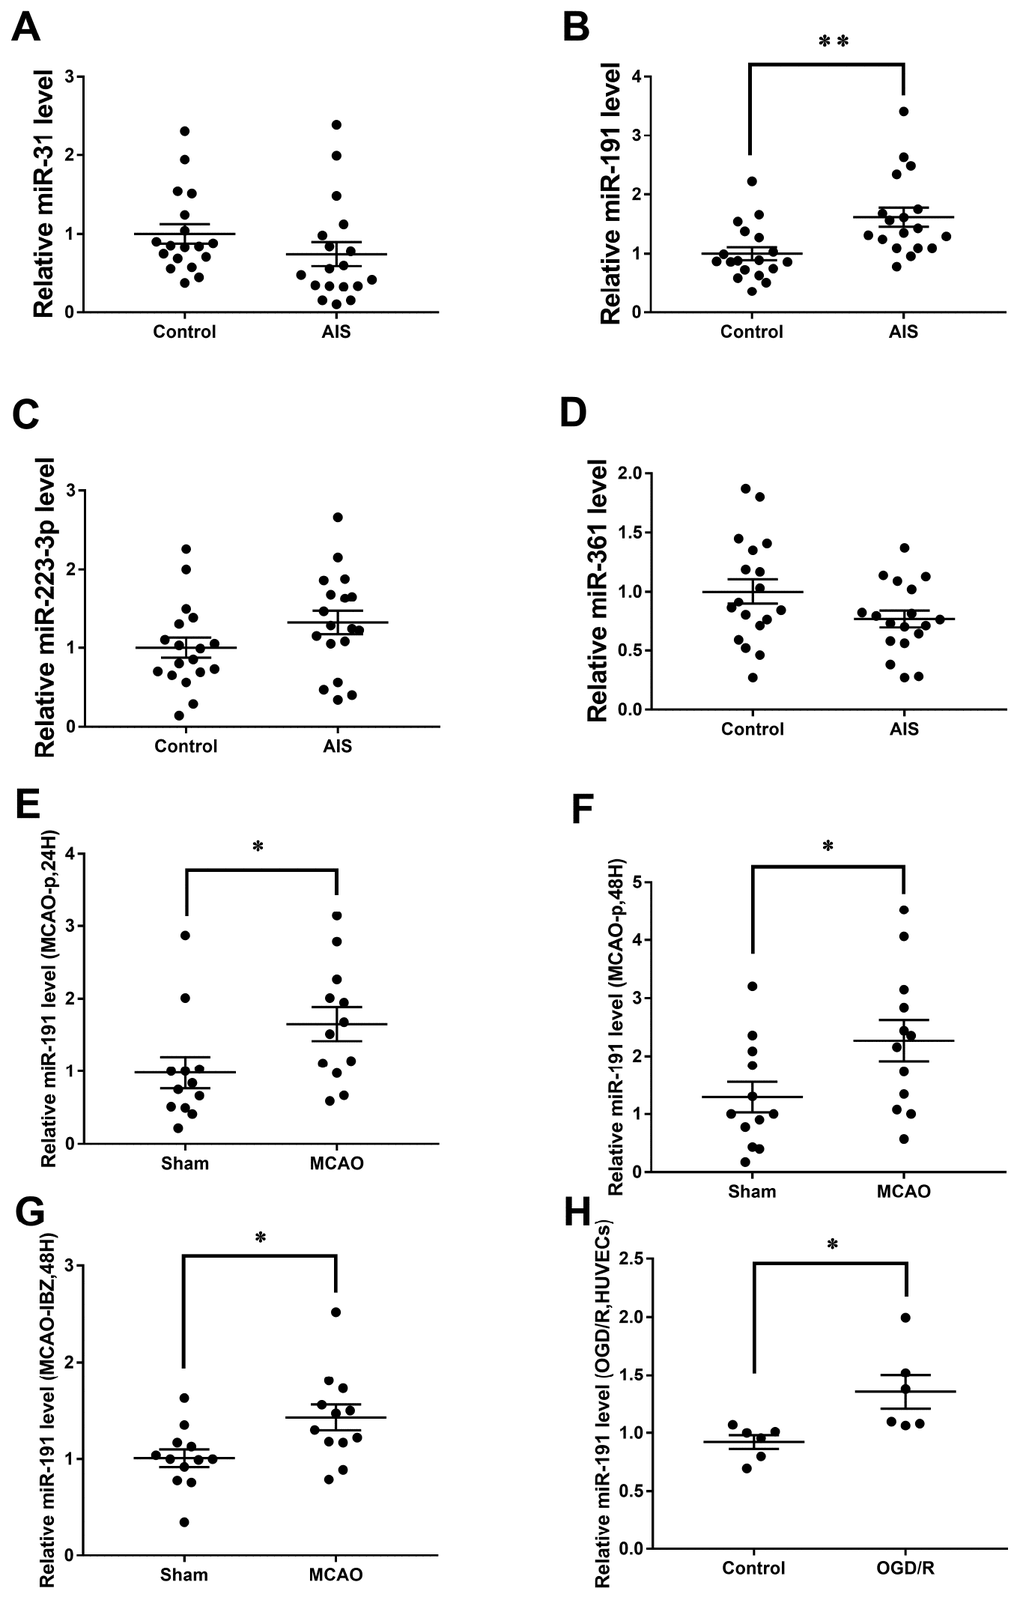 Relative miRNAs levels. Expression levels of miRNAs in Cohort A+B (n=18) (A) miR-31, (B) miR-191, (C) miR-223-3p, (D) miR-361; (E) Expression level of miR-191 in rat MCAO plasma after 24h reperfusion (n=12); (F) Expression level of miR-191 in rat MCAO plasma after 48h reperfusion (n=12); (G) Expression level of miR-191 in rat MCAO brains (n=12); (H) Expression level of miR-191 in OGD HUVECs (n=6). Means ± SEM. * P